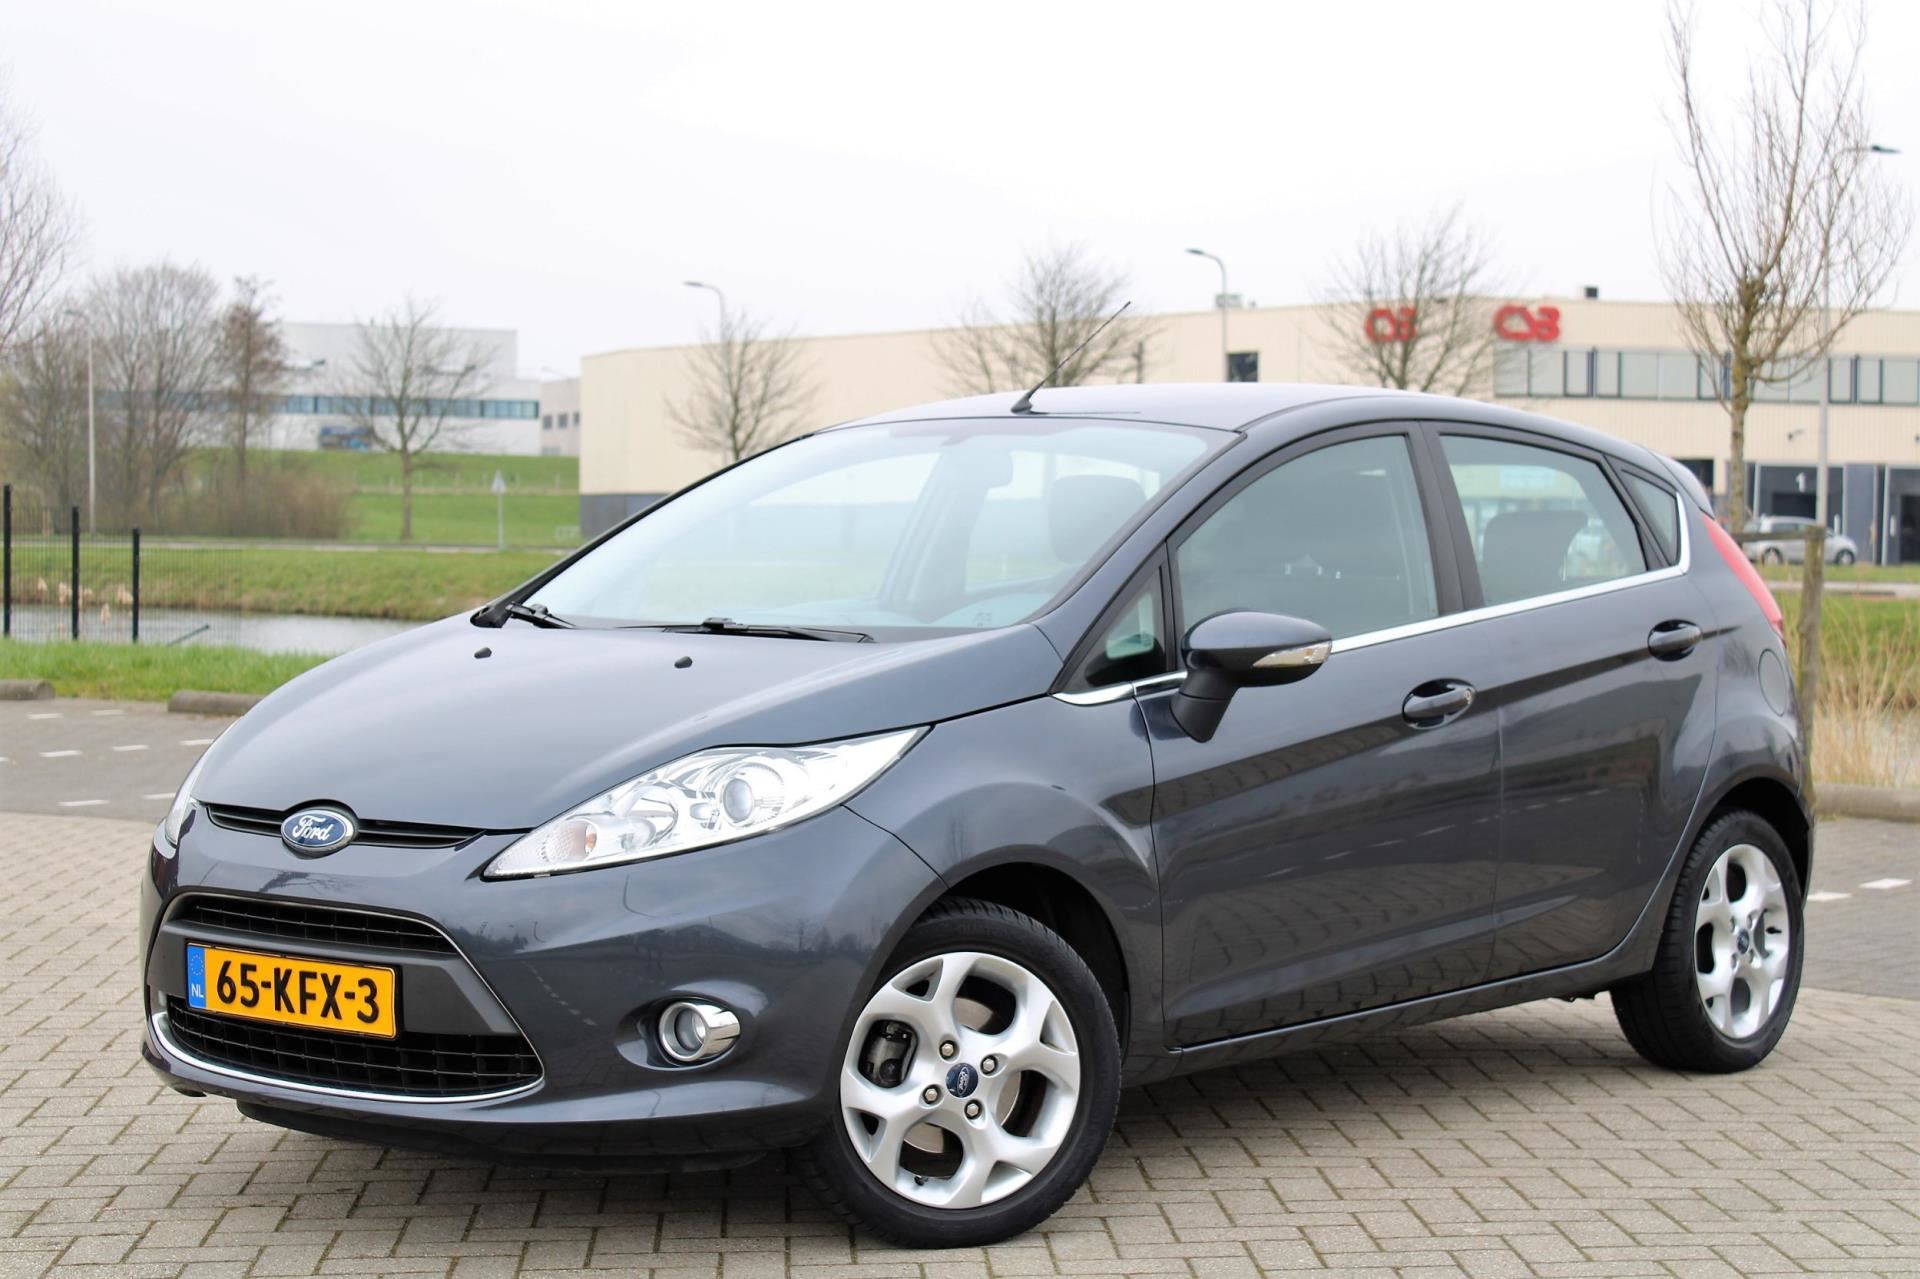 Ford Fiesta occasion - A tot Z Auto's B.V.